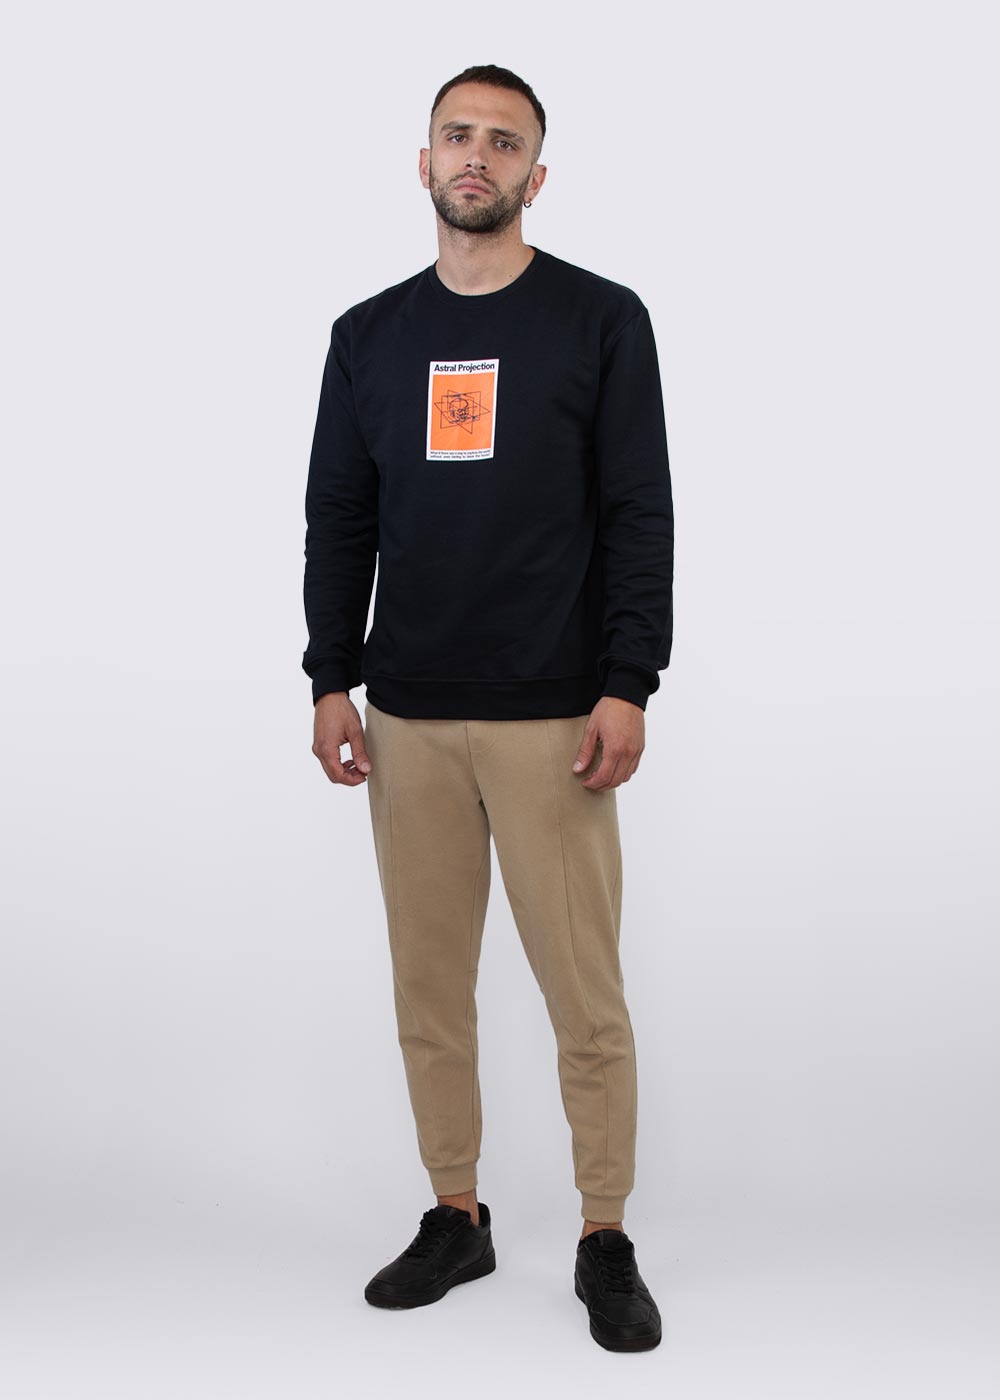 Pullover Negro Para Hombre : Astral Projection | Epicland